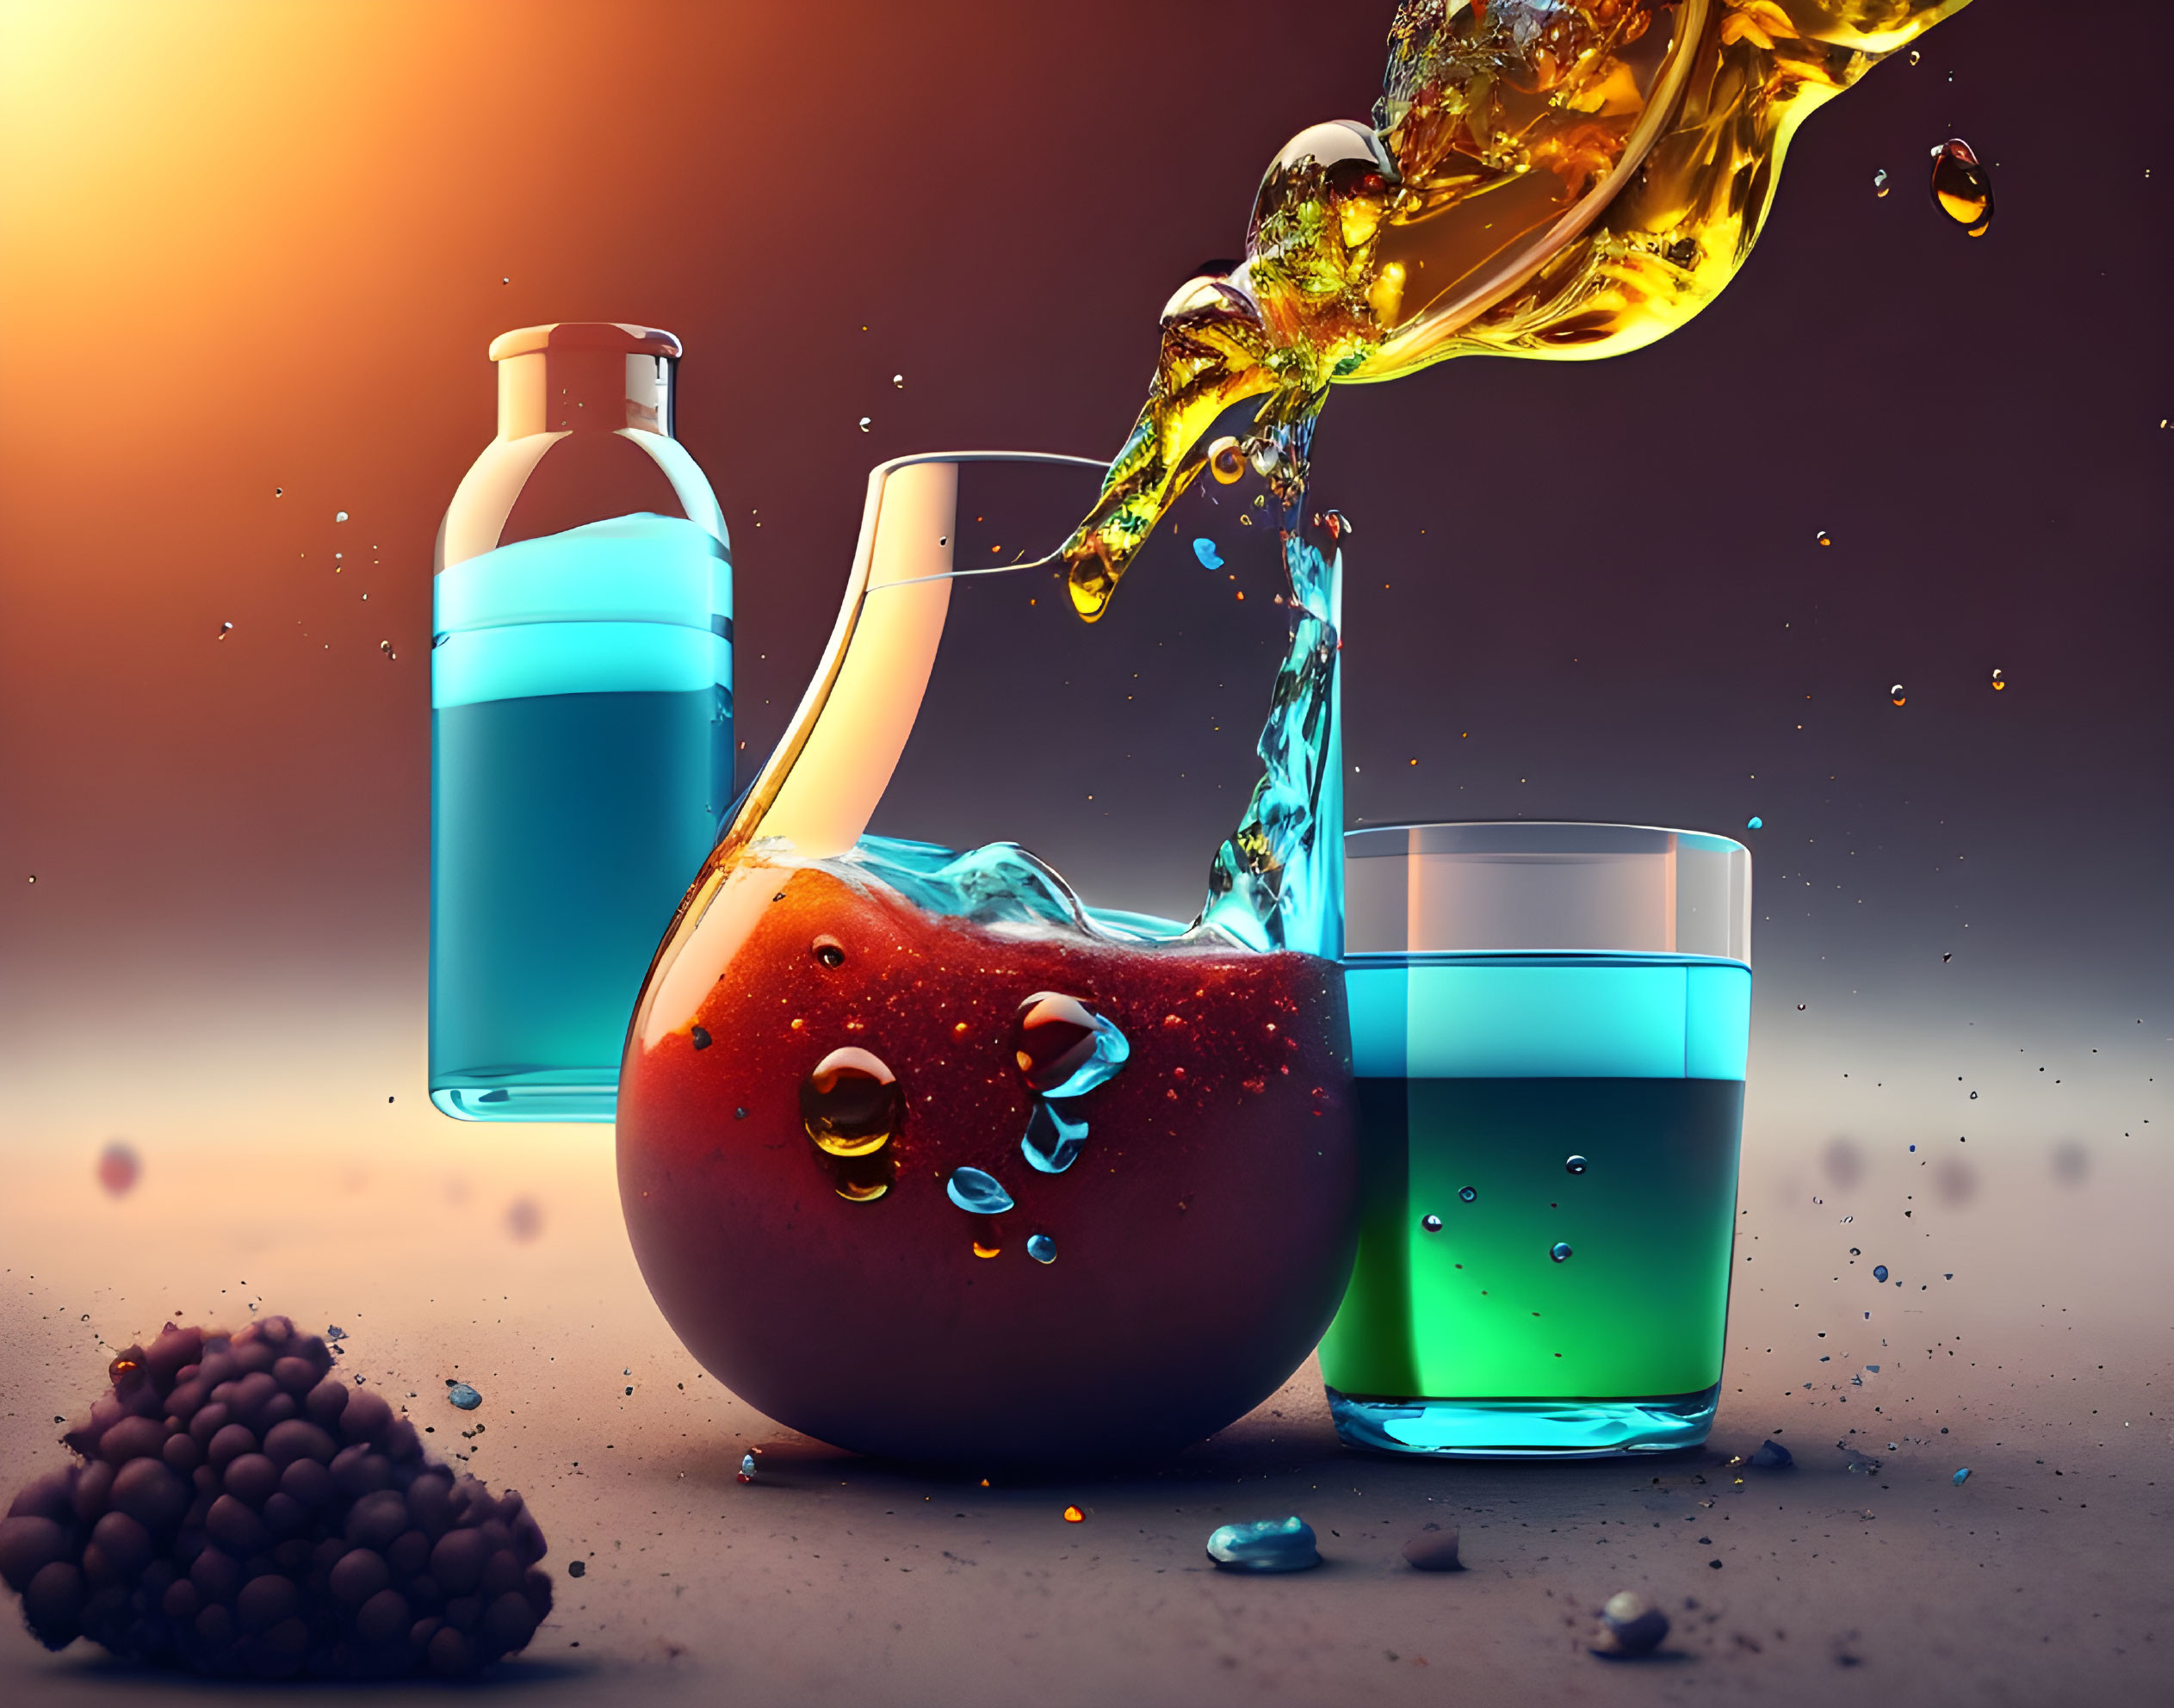 Colorful liquids merging in apple-shaped glass on warm backdrop